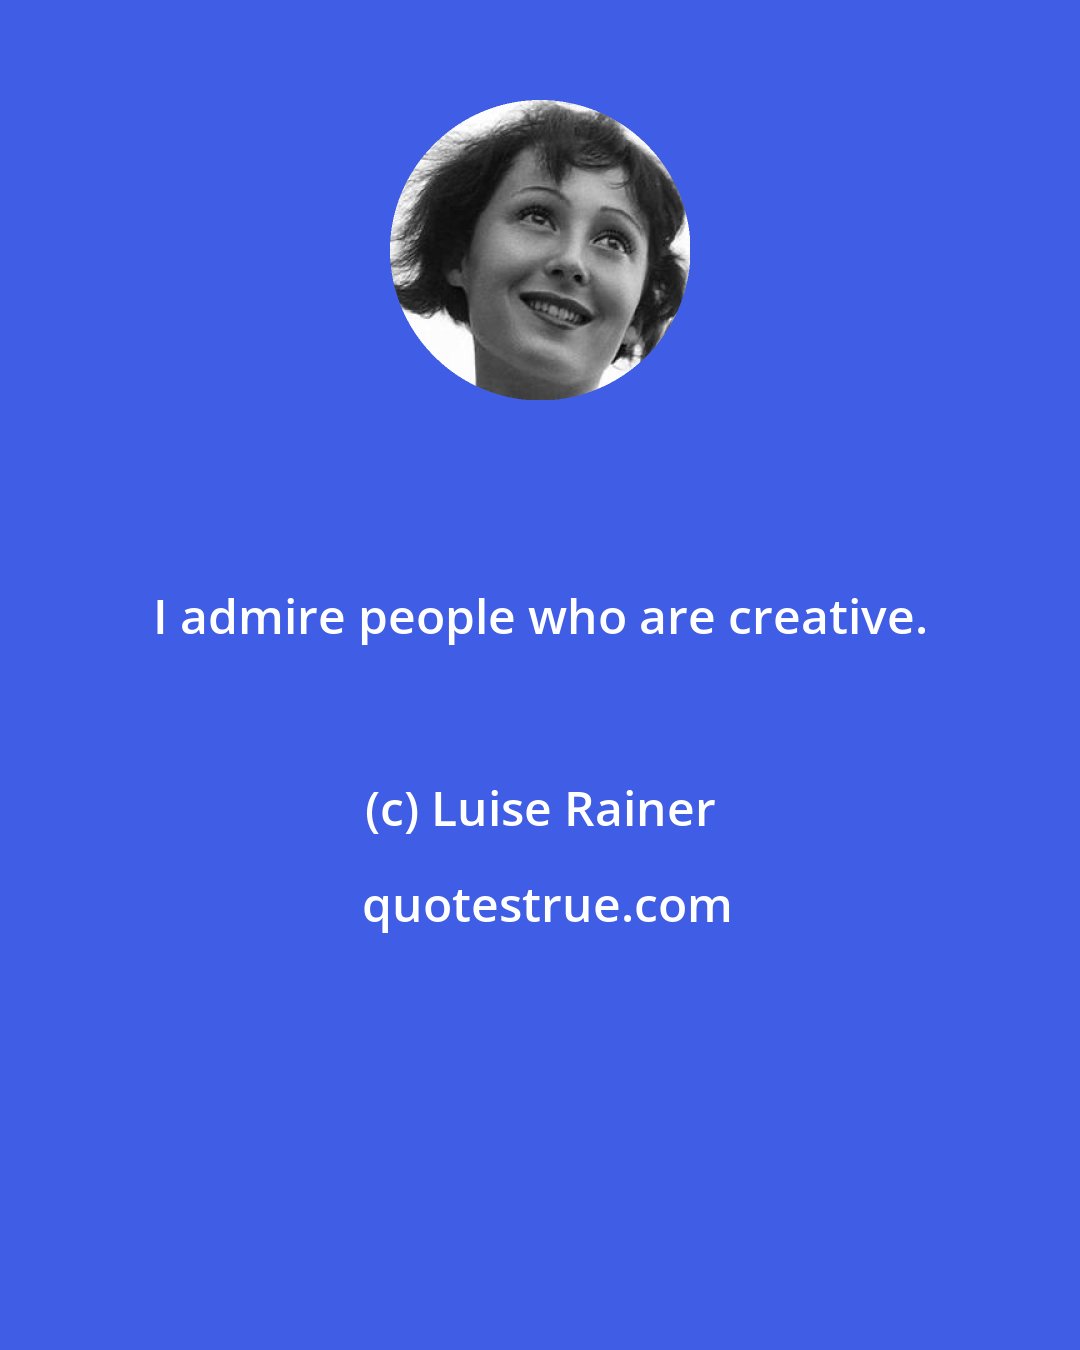 Luise Rainer: I admire people who are creative.